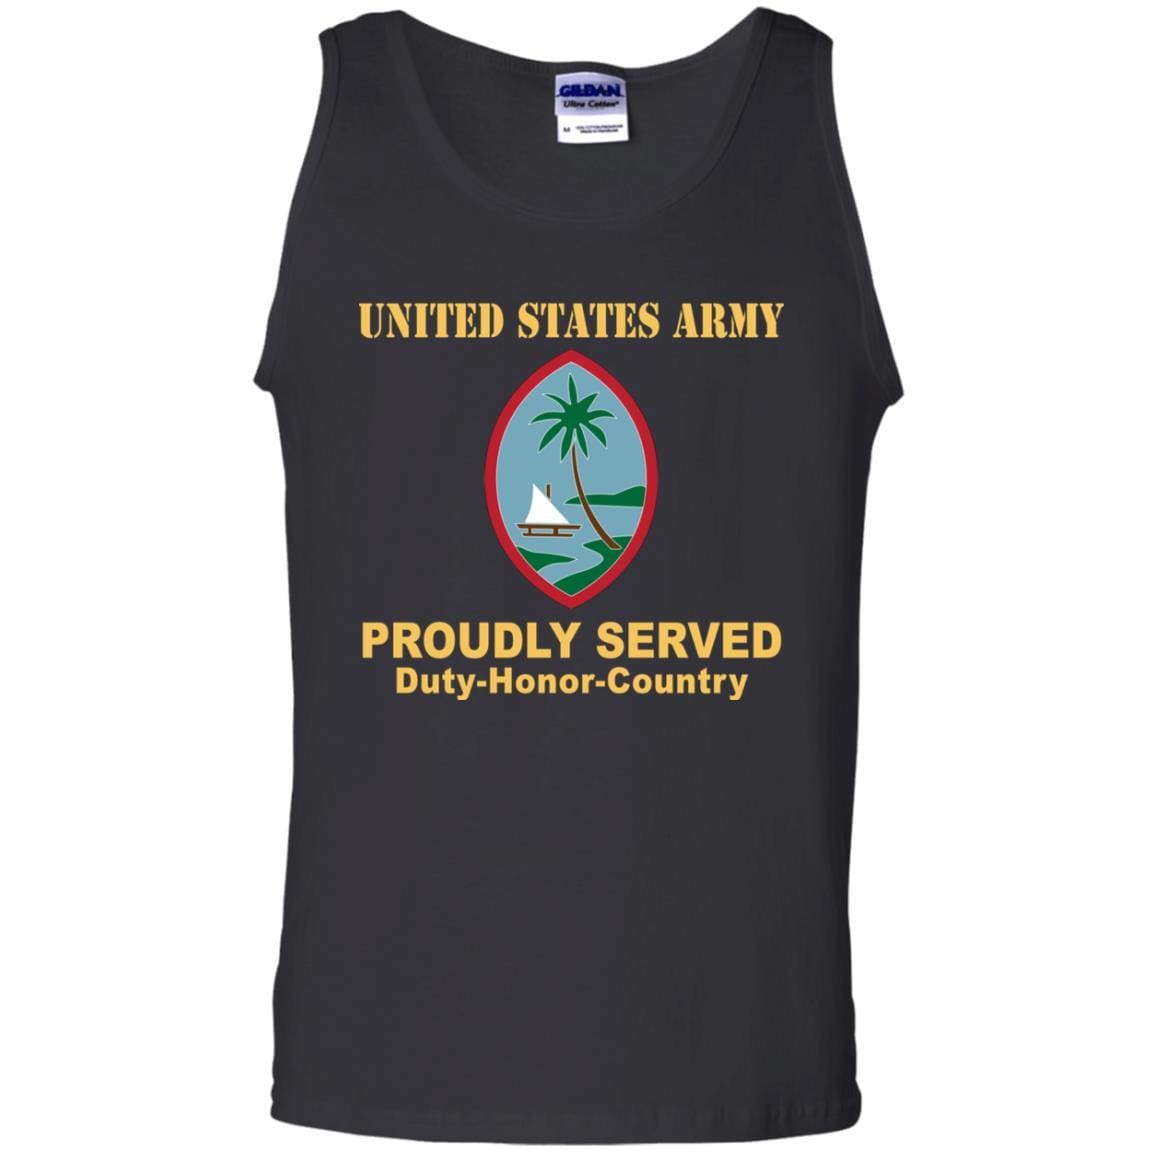 US ARMY CSIB GUAM ARMY NATIONAL GUARD ELEMENT JOINT FORCE HEADQUARTERS- Proudly Served T-Shirt On Front For Men-TShirt-Army-Veterans Nation